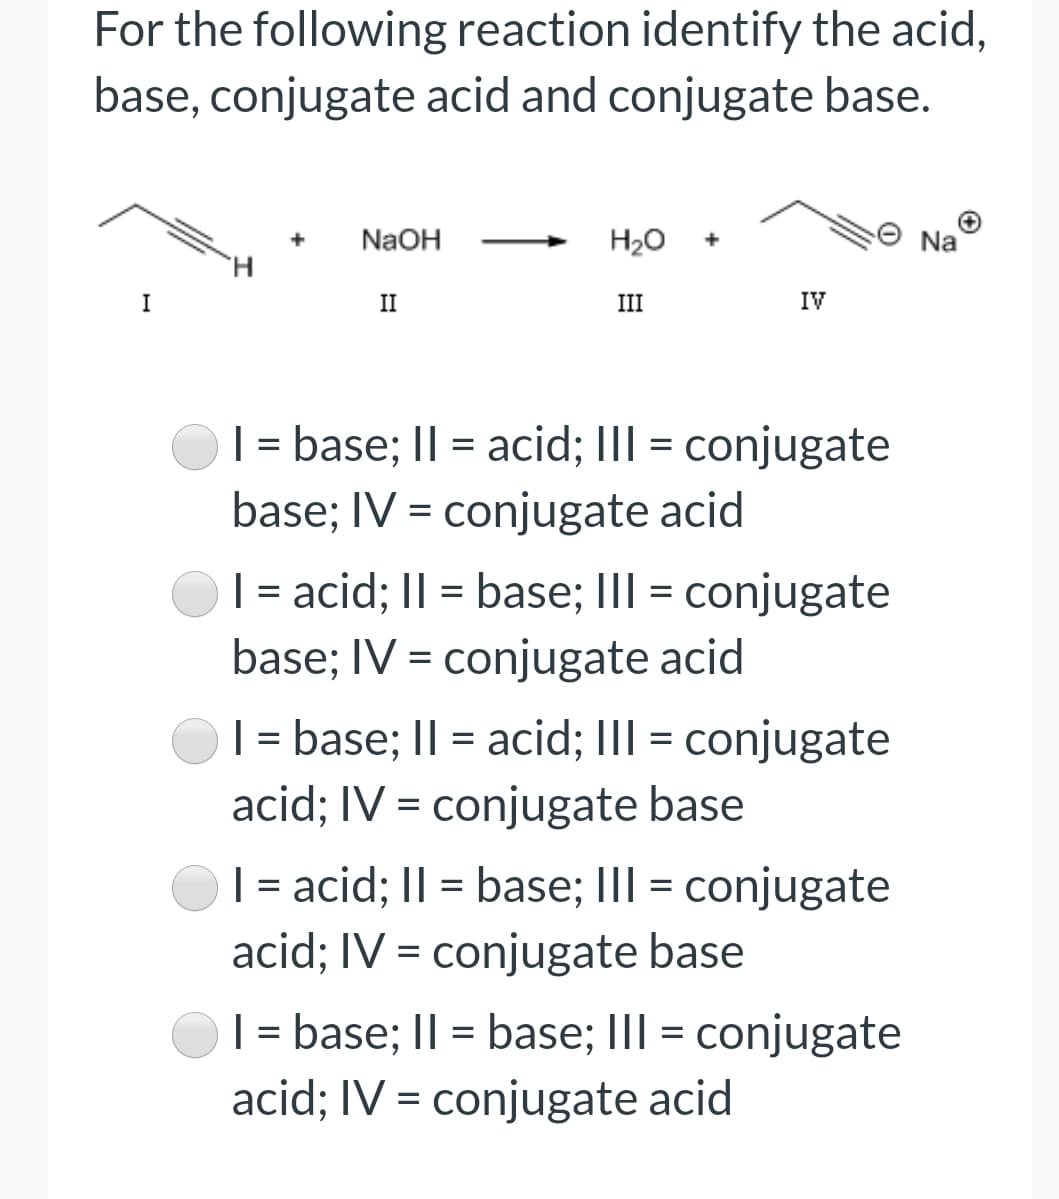 For the following reaction identify the acid,
base, conjugate acid and conjugate base.
NaOH
H20
Na
I
II
III
IV
| = base; II = acid; III = conjugate
base; IV = conjugate acid
| = acid; II = base; III = conjugate
base; IV = conjugate acid
| = base; I| = acid; III = conjugate
acid; IV = conjugate base
| = acid; II = base; III = conjugate
acid; IV = conjugate base
| = base; I| = base; III = conjugate
%3D
acid; IV = conjugate acid
